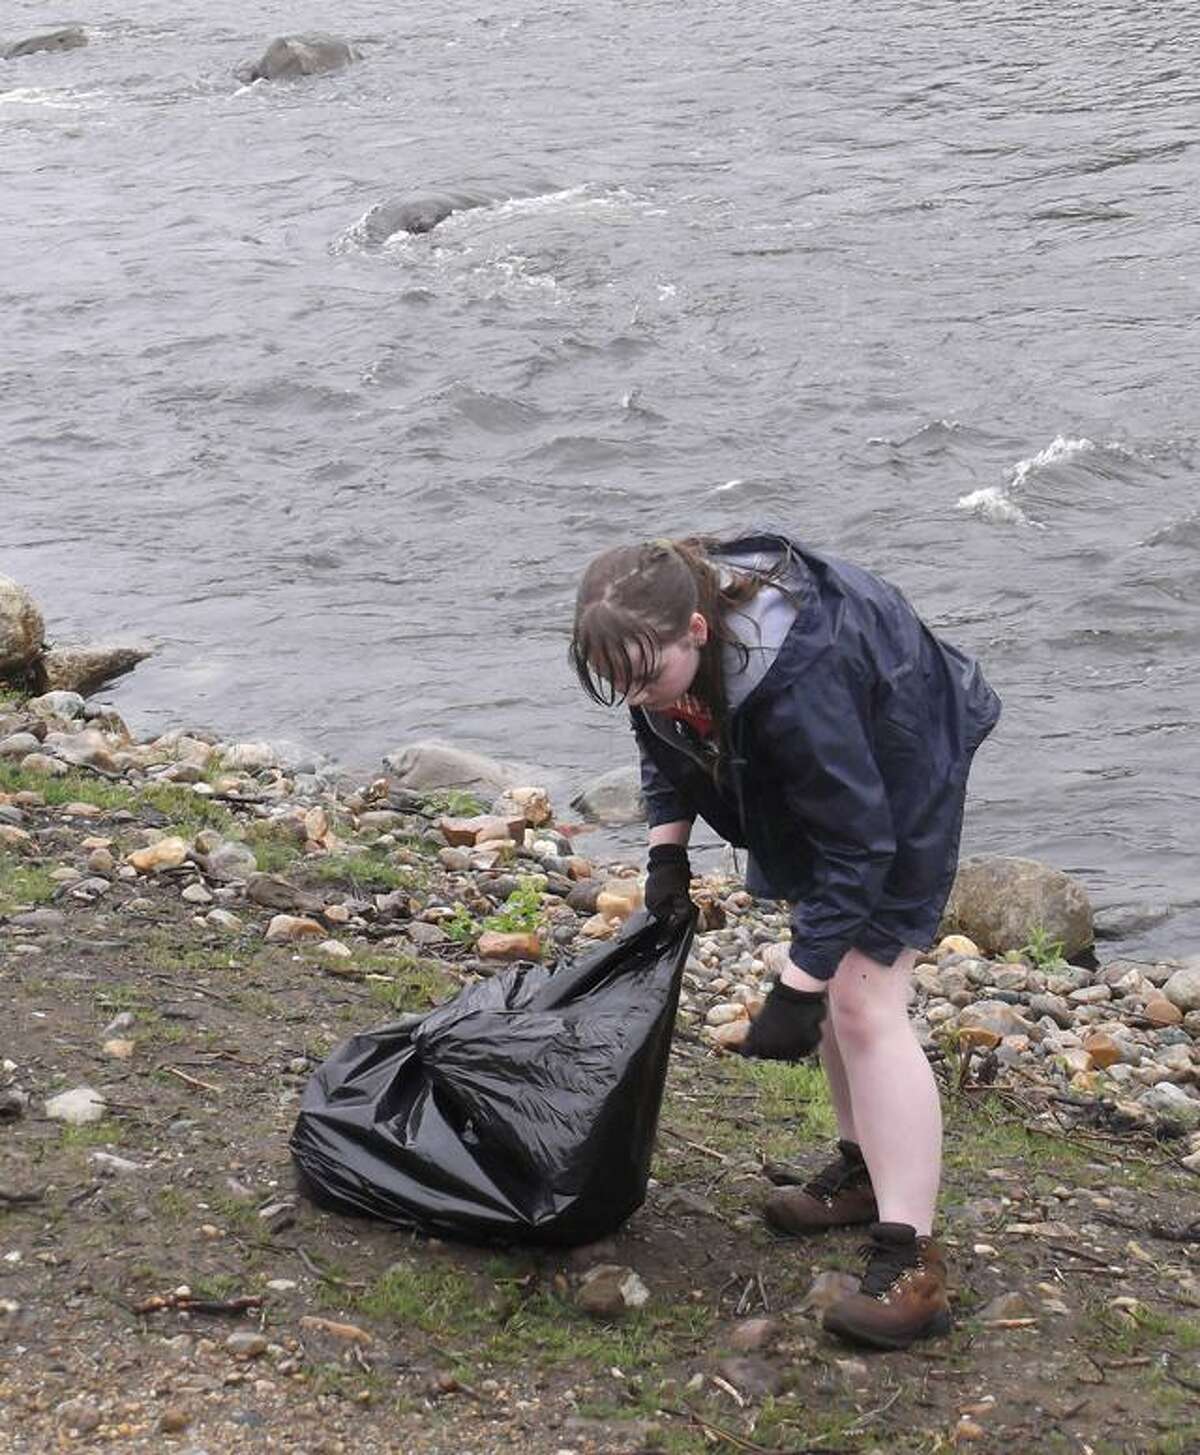 RICKY CAMPBELL/ Register Citizen Aimee Gregg, 15, walks along the Naugatuck River near Torrington's Sullivan Senior Center, picking up garbage and debris leftover from Hurricane Irene and careless citizens. Gregg, an FFA member from Barkhamsted, joined other groups Saturday during the 6th Annual Naugatuck River Clean Up effort from Torrington's north end to Campville.